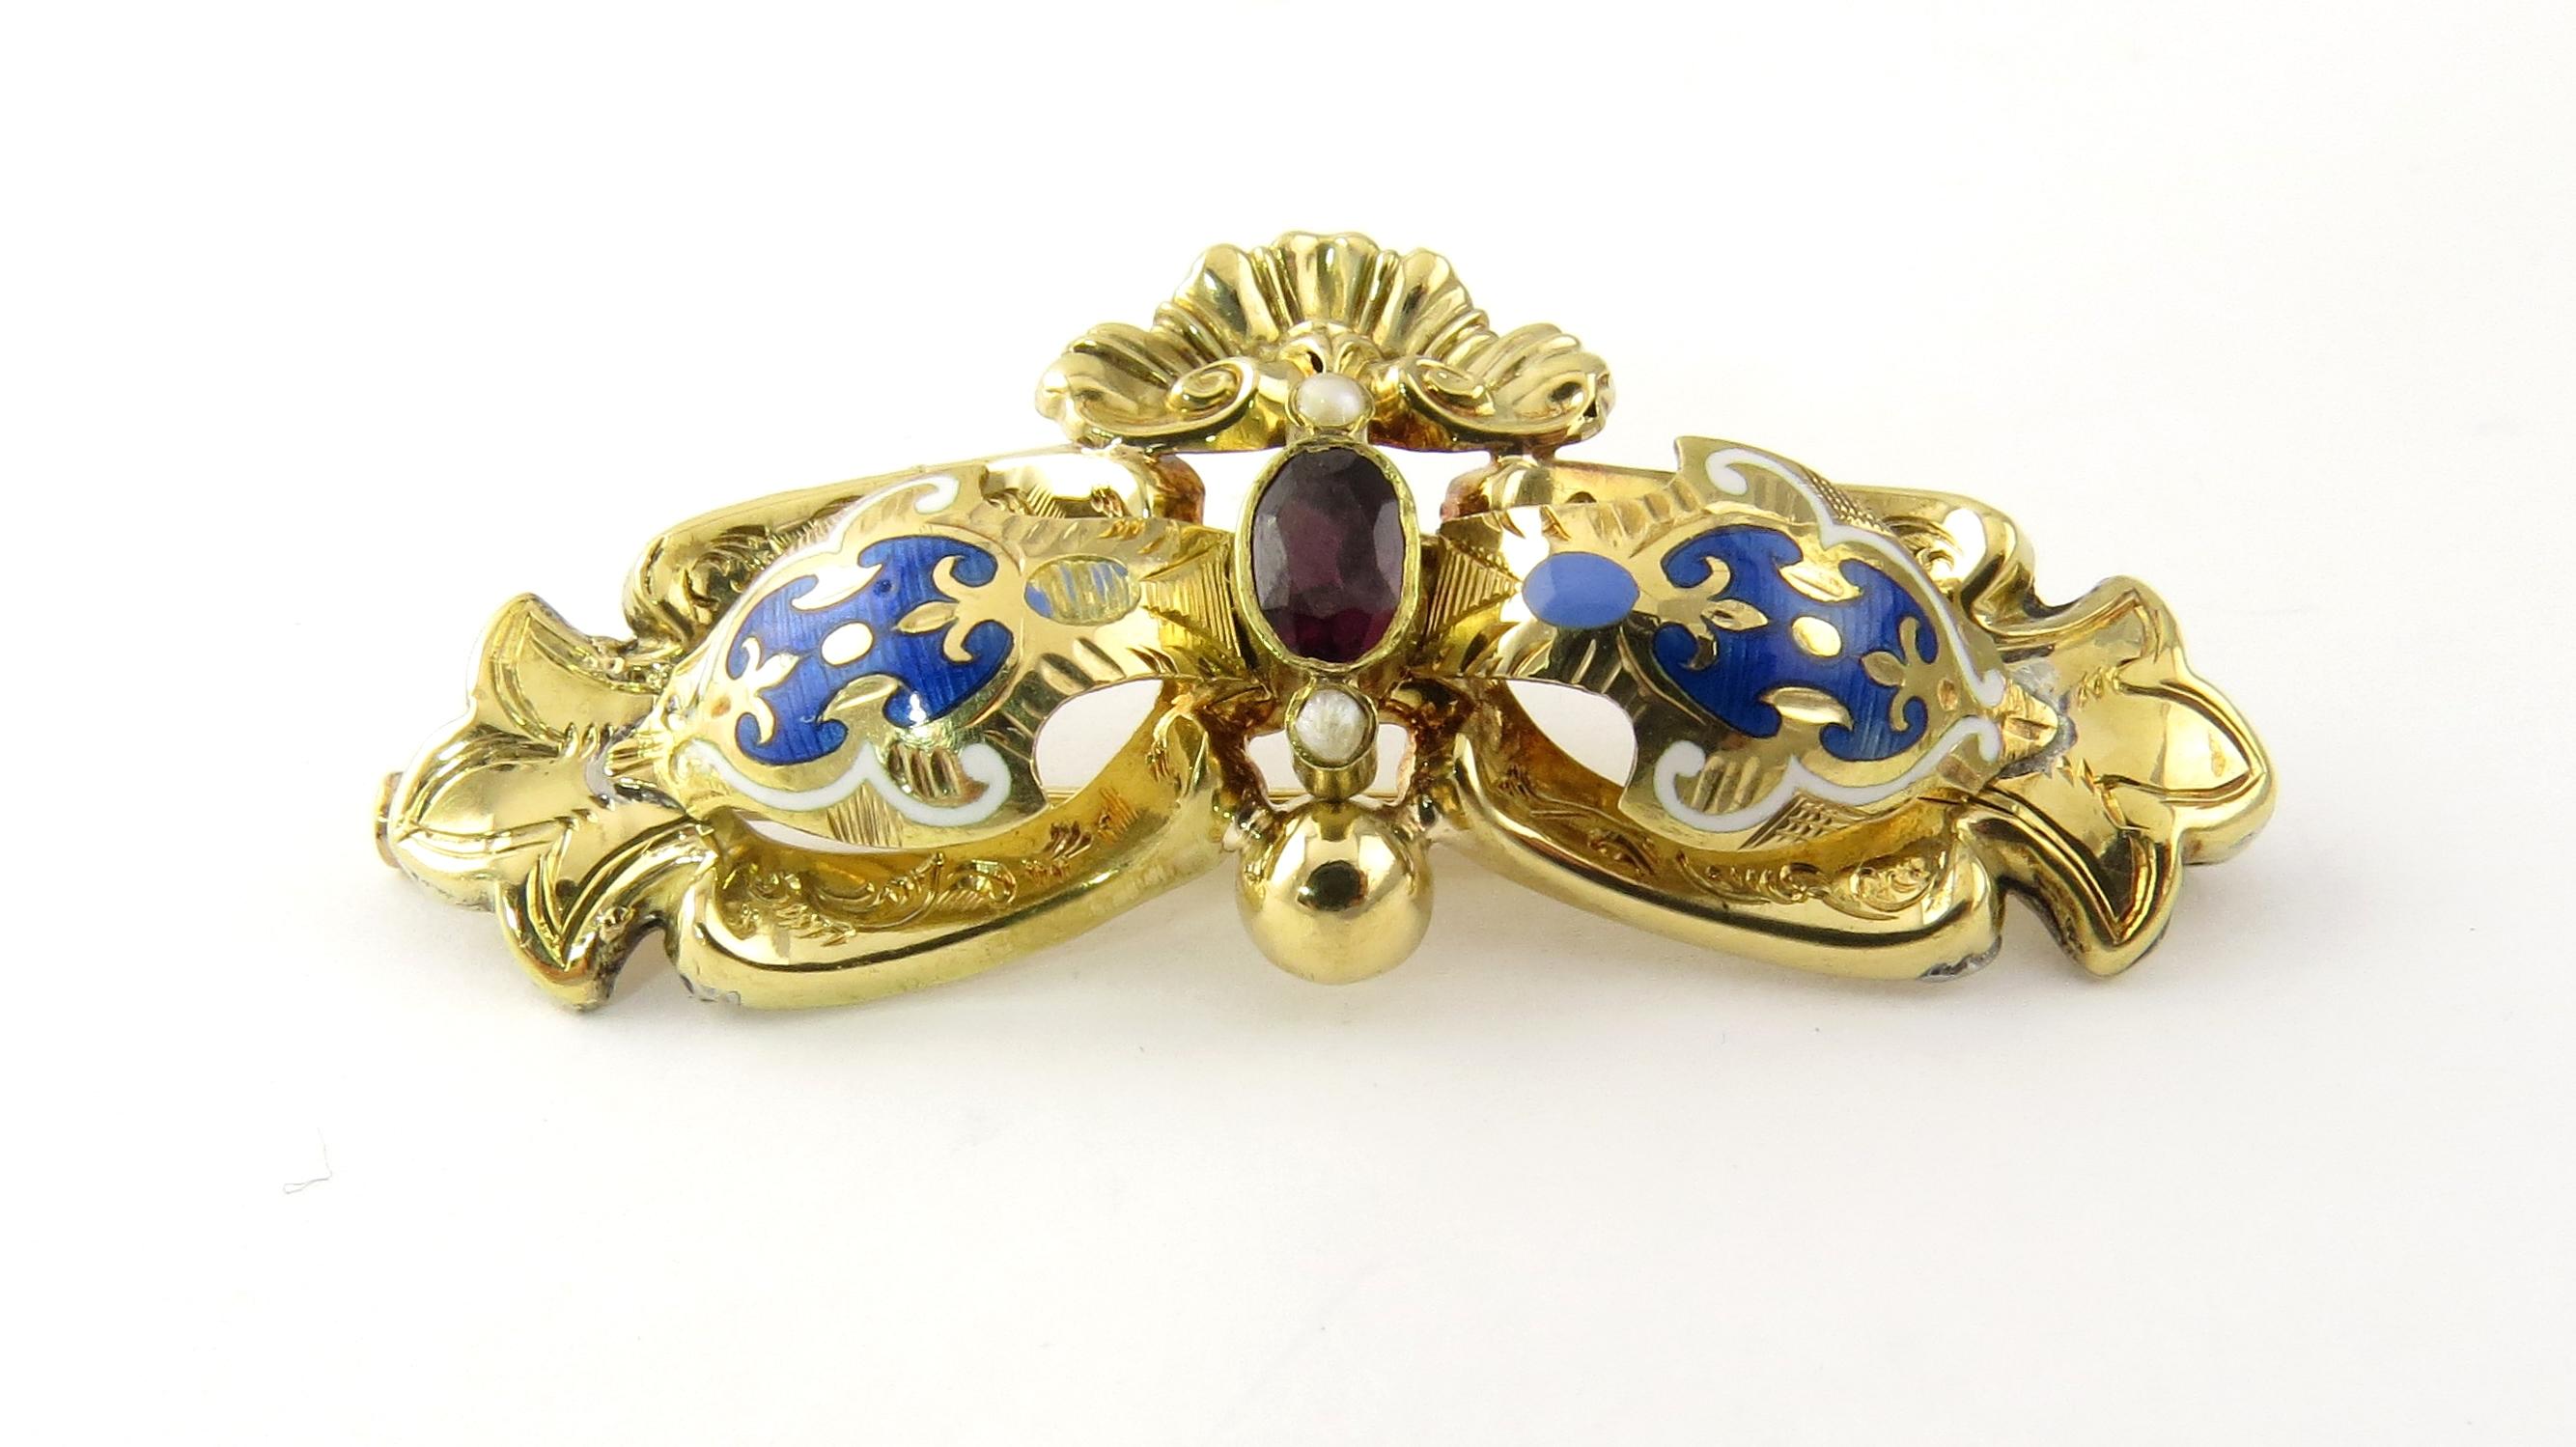 Vintage 18 Karat Yellow Gold, Garnet, Seed Pearl and Enamel Brooch / Pin

This stunning enameled brooch features one oval garnet (7 mm x 5 mm) two seed pearls beautifullly detailed in 18K yellow gold.

Size: 48 mm x 22 mm

Weight: 4.0 dwt. / 6.3